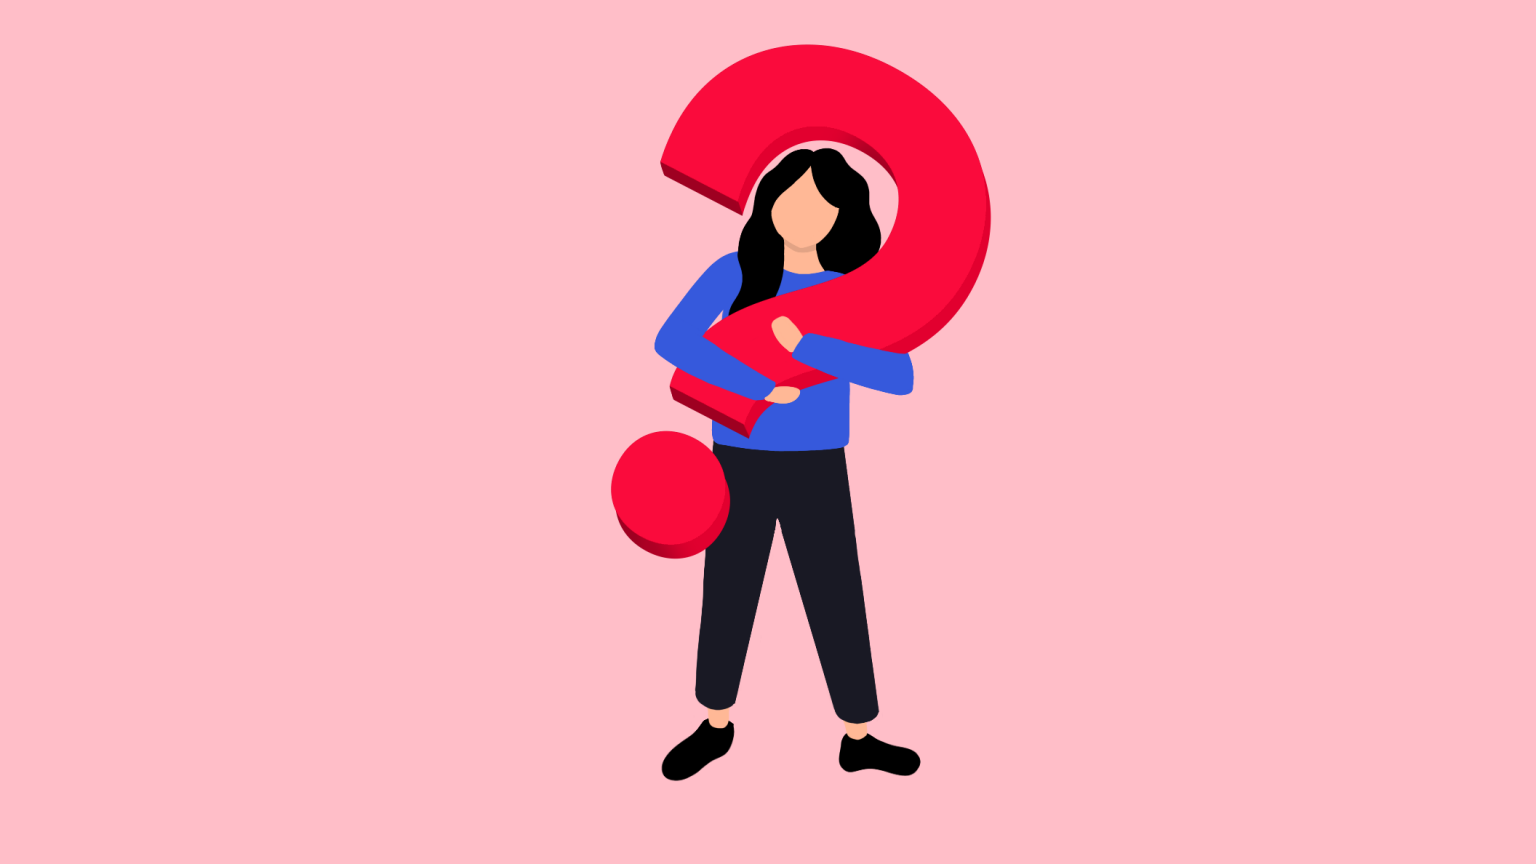 illustration of person holding a question mark